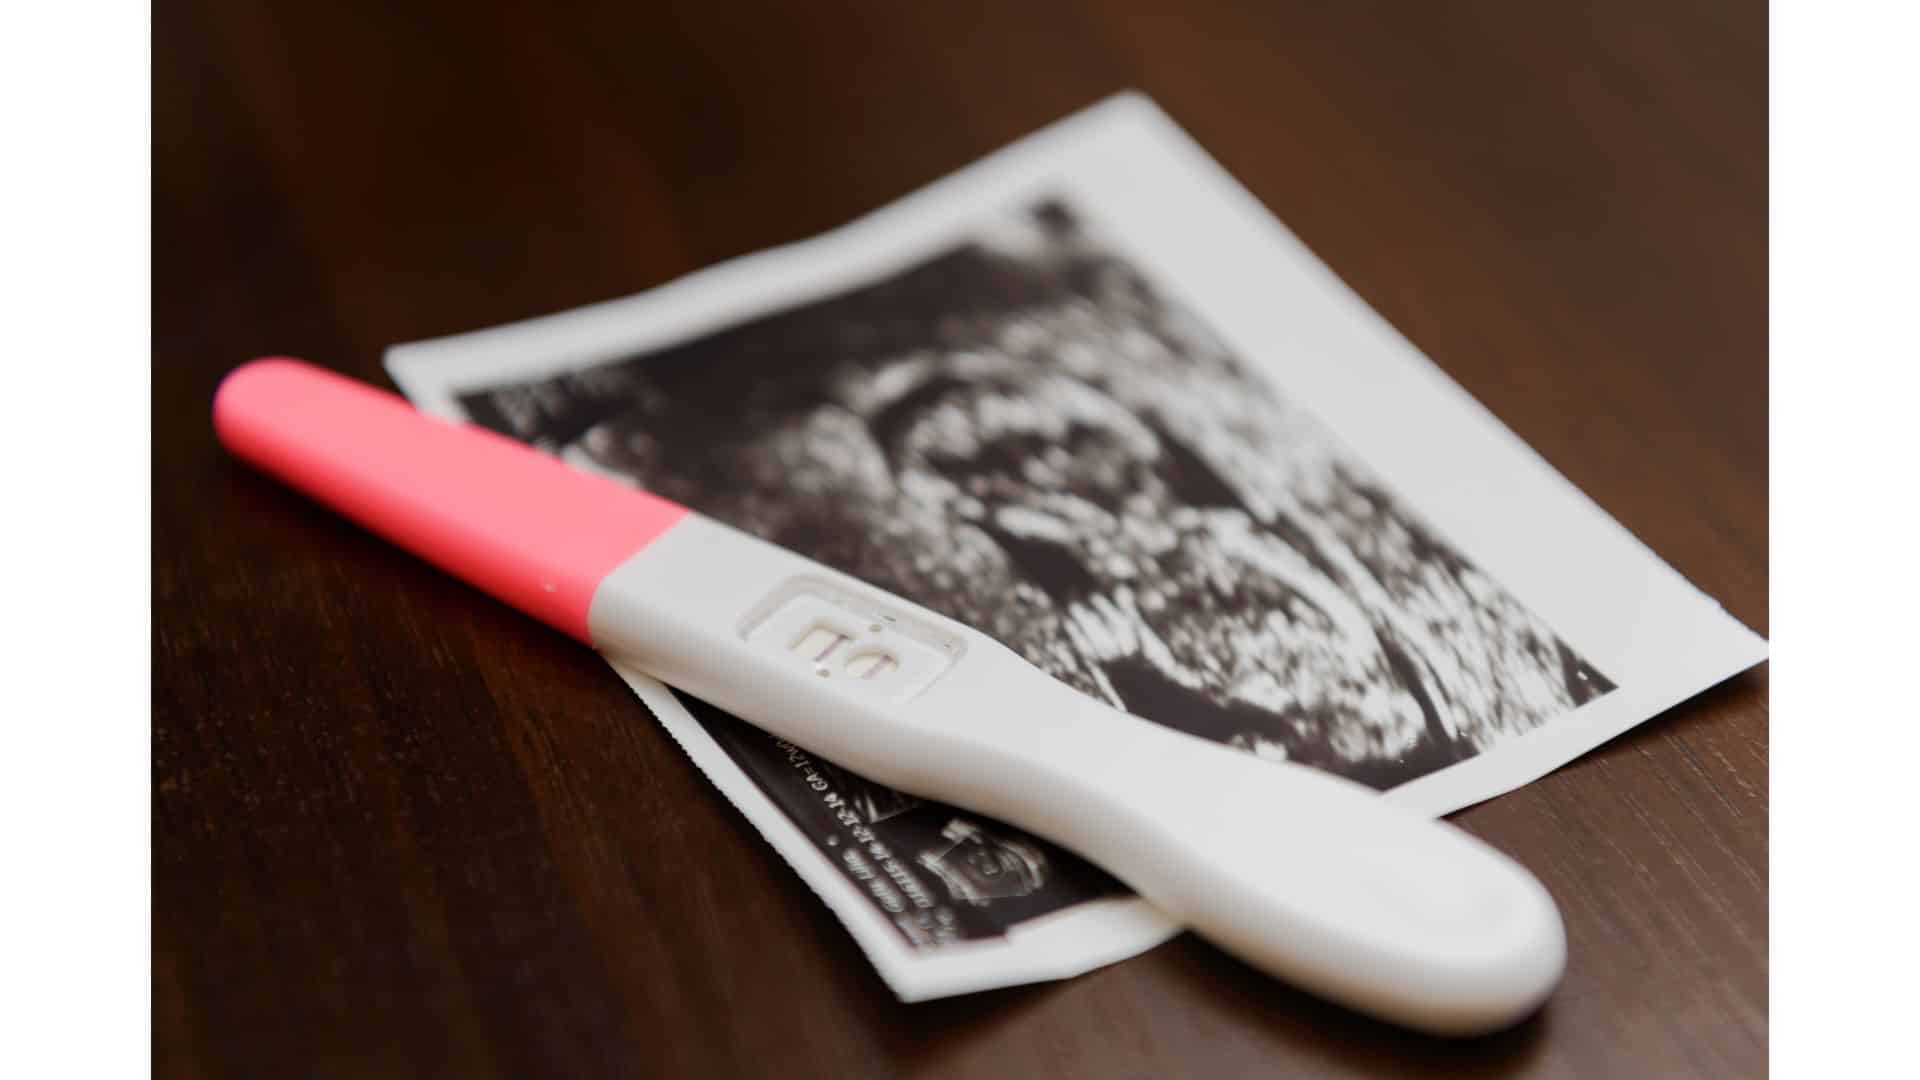 What is the best pregnancy test and why